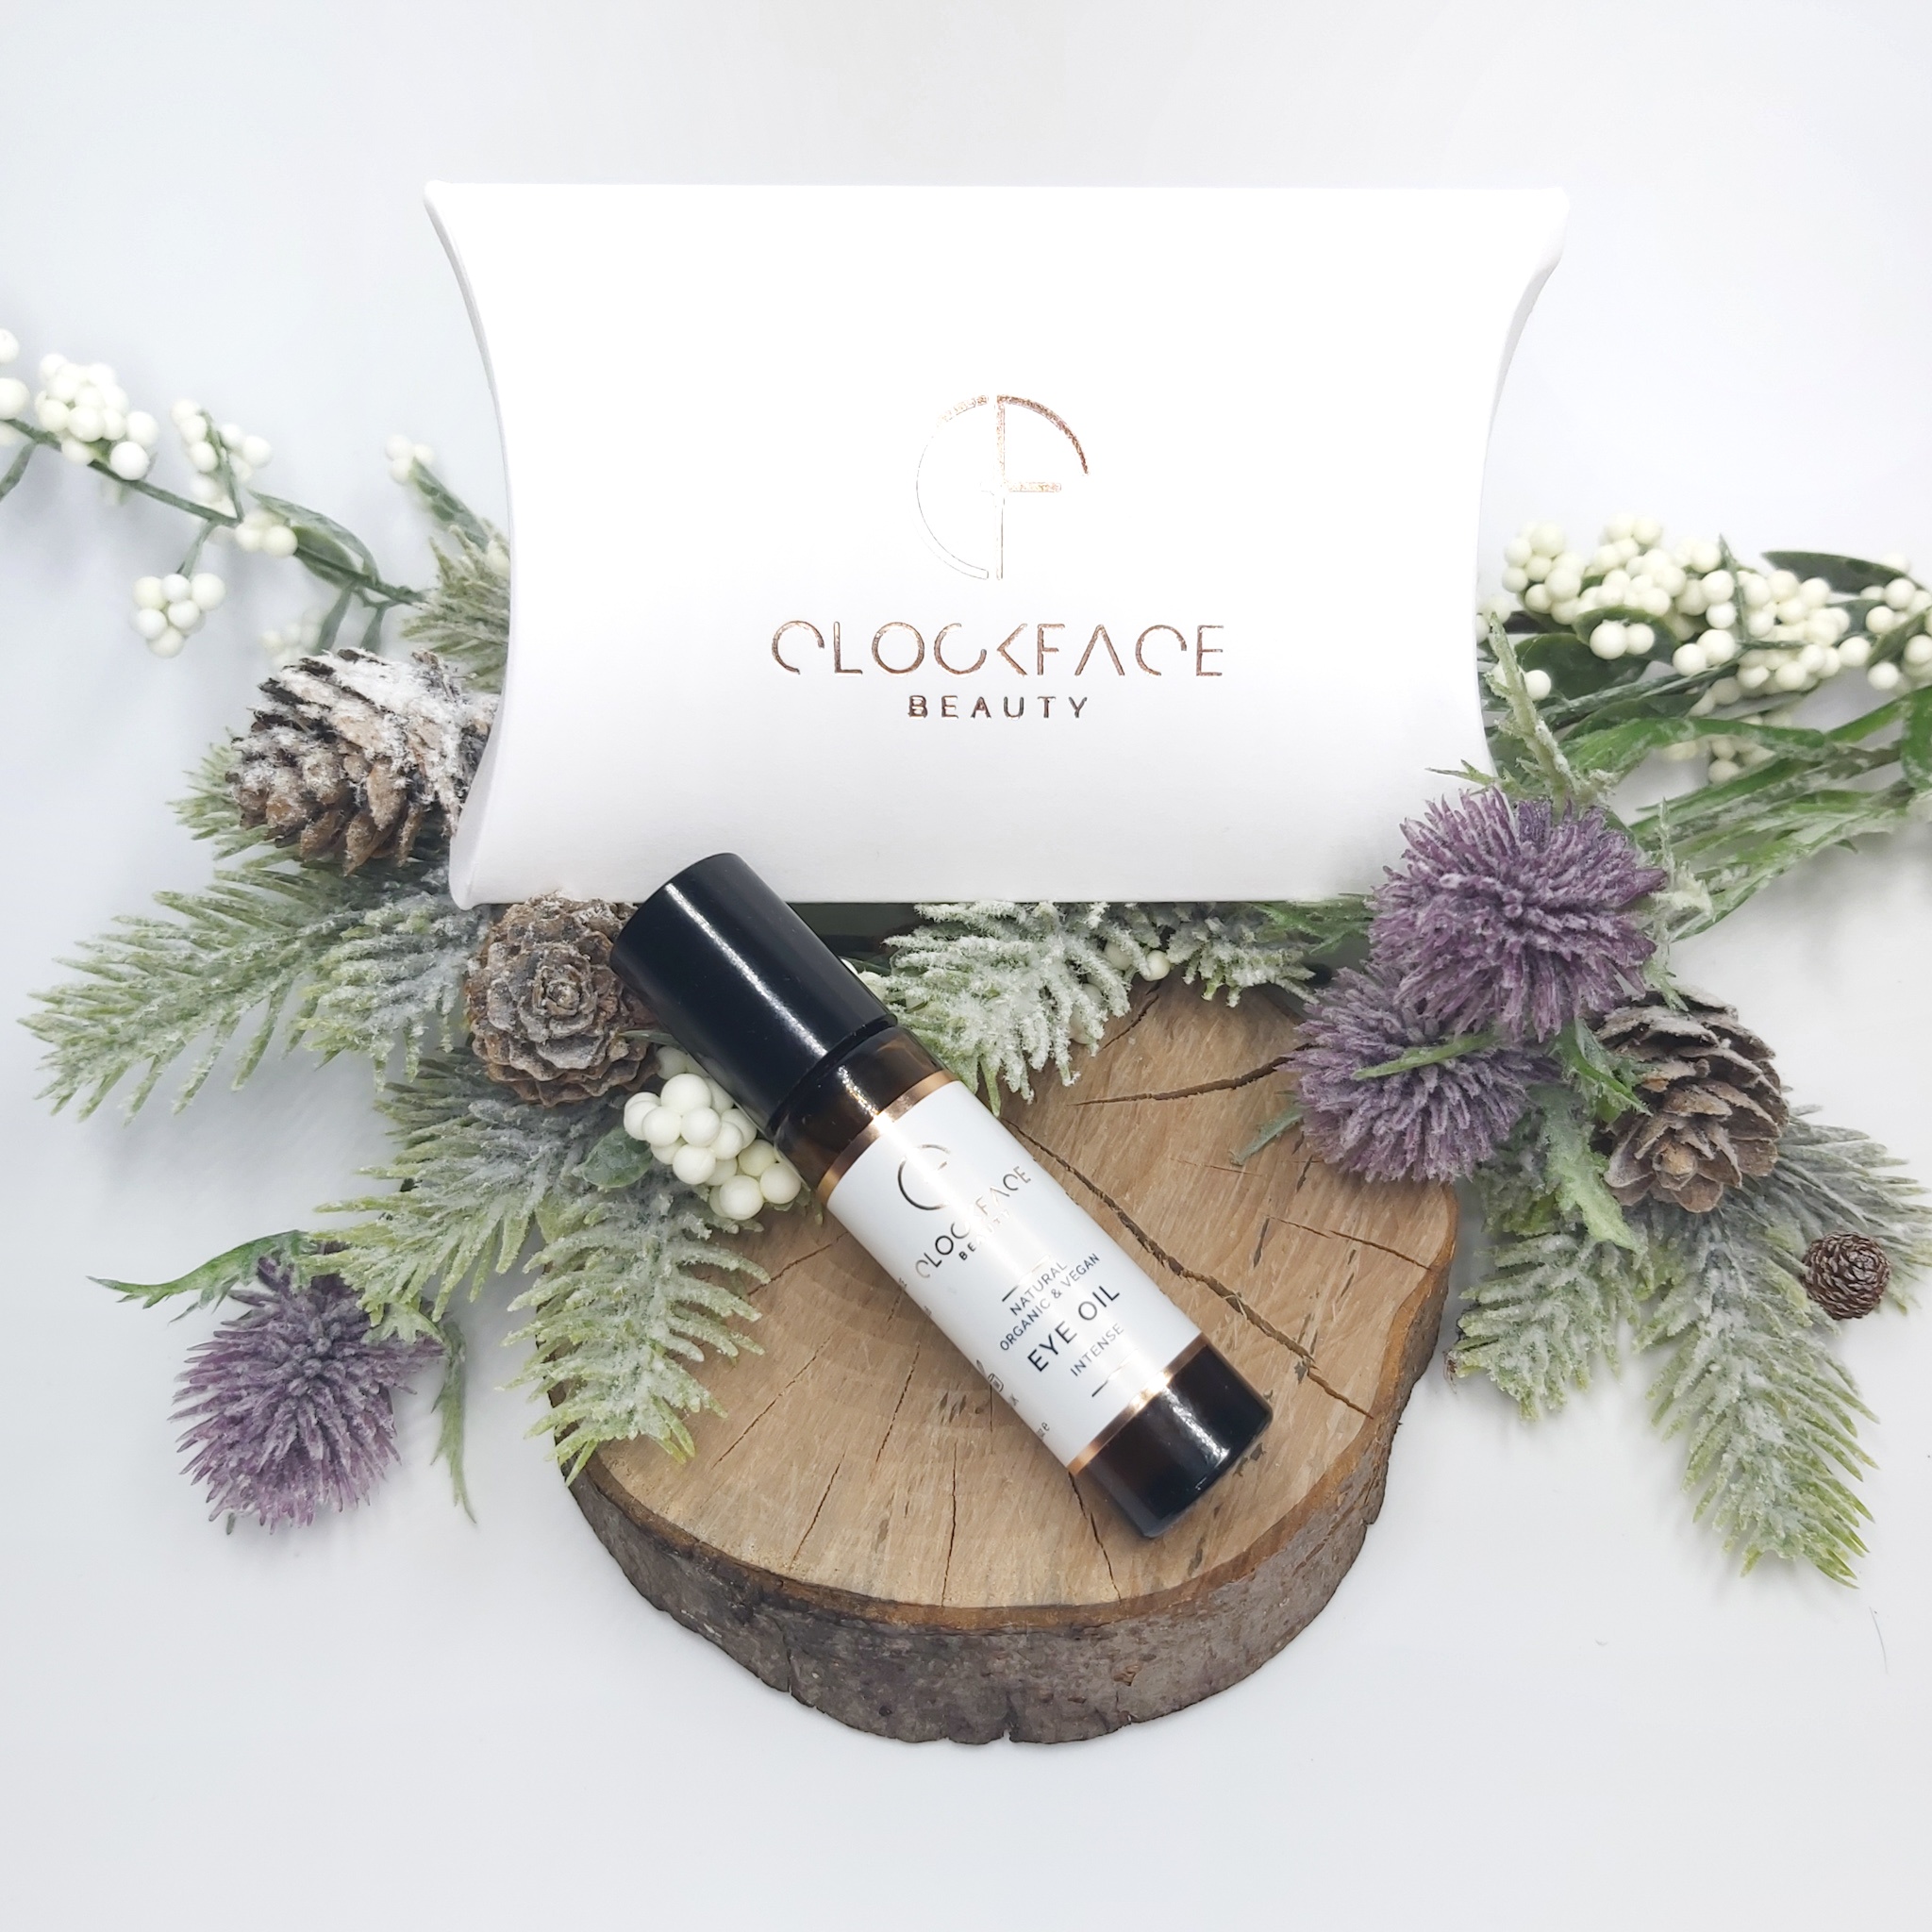 Clockface Beauty Intense Eye Oil on a log slice with the white pillowbox packaging. Natural Beauty Christmas Gift Guide by Beauty Folio